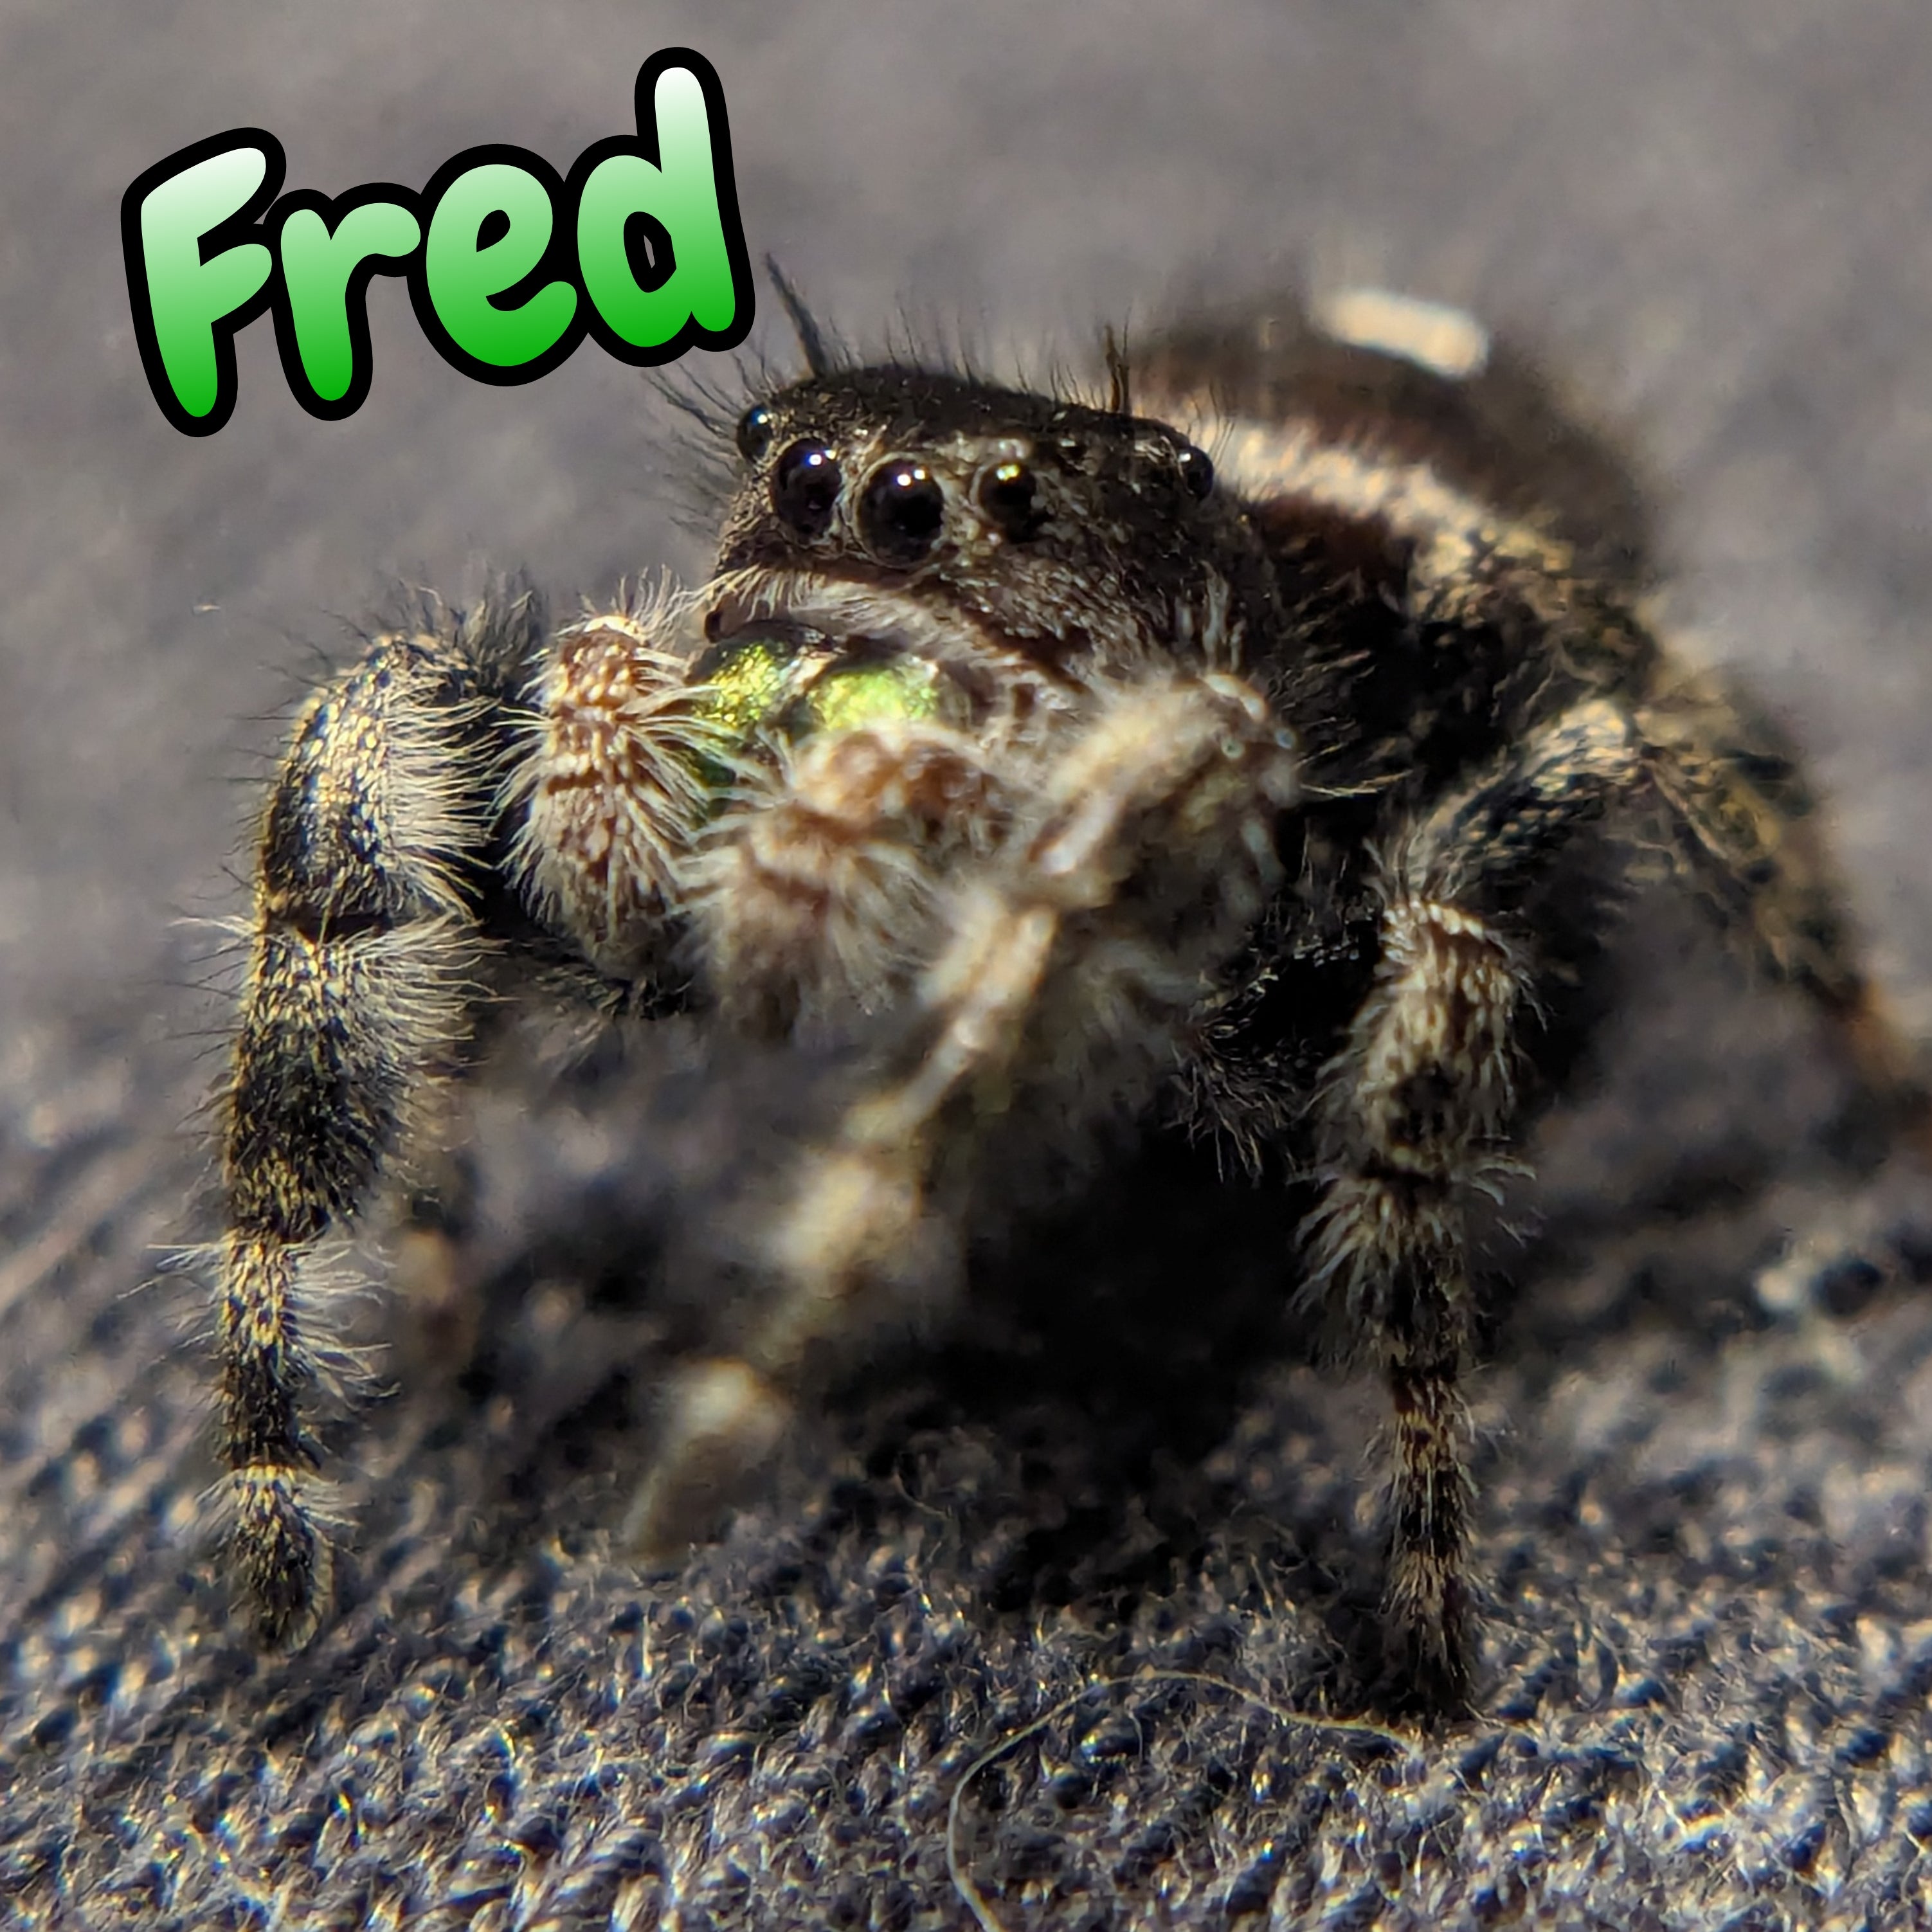 Audax Jumping Spider "Fred"